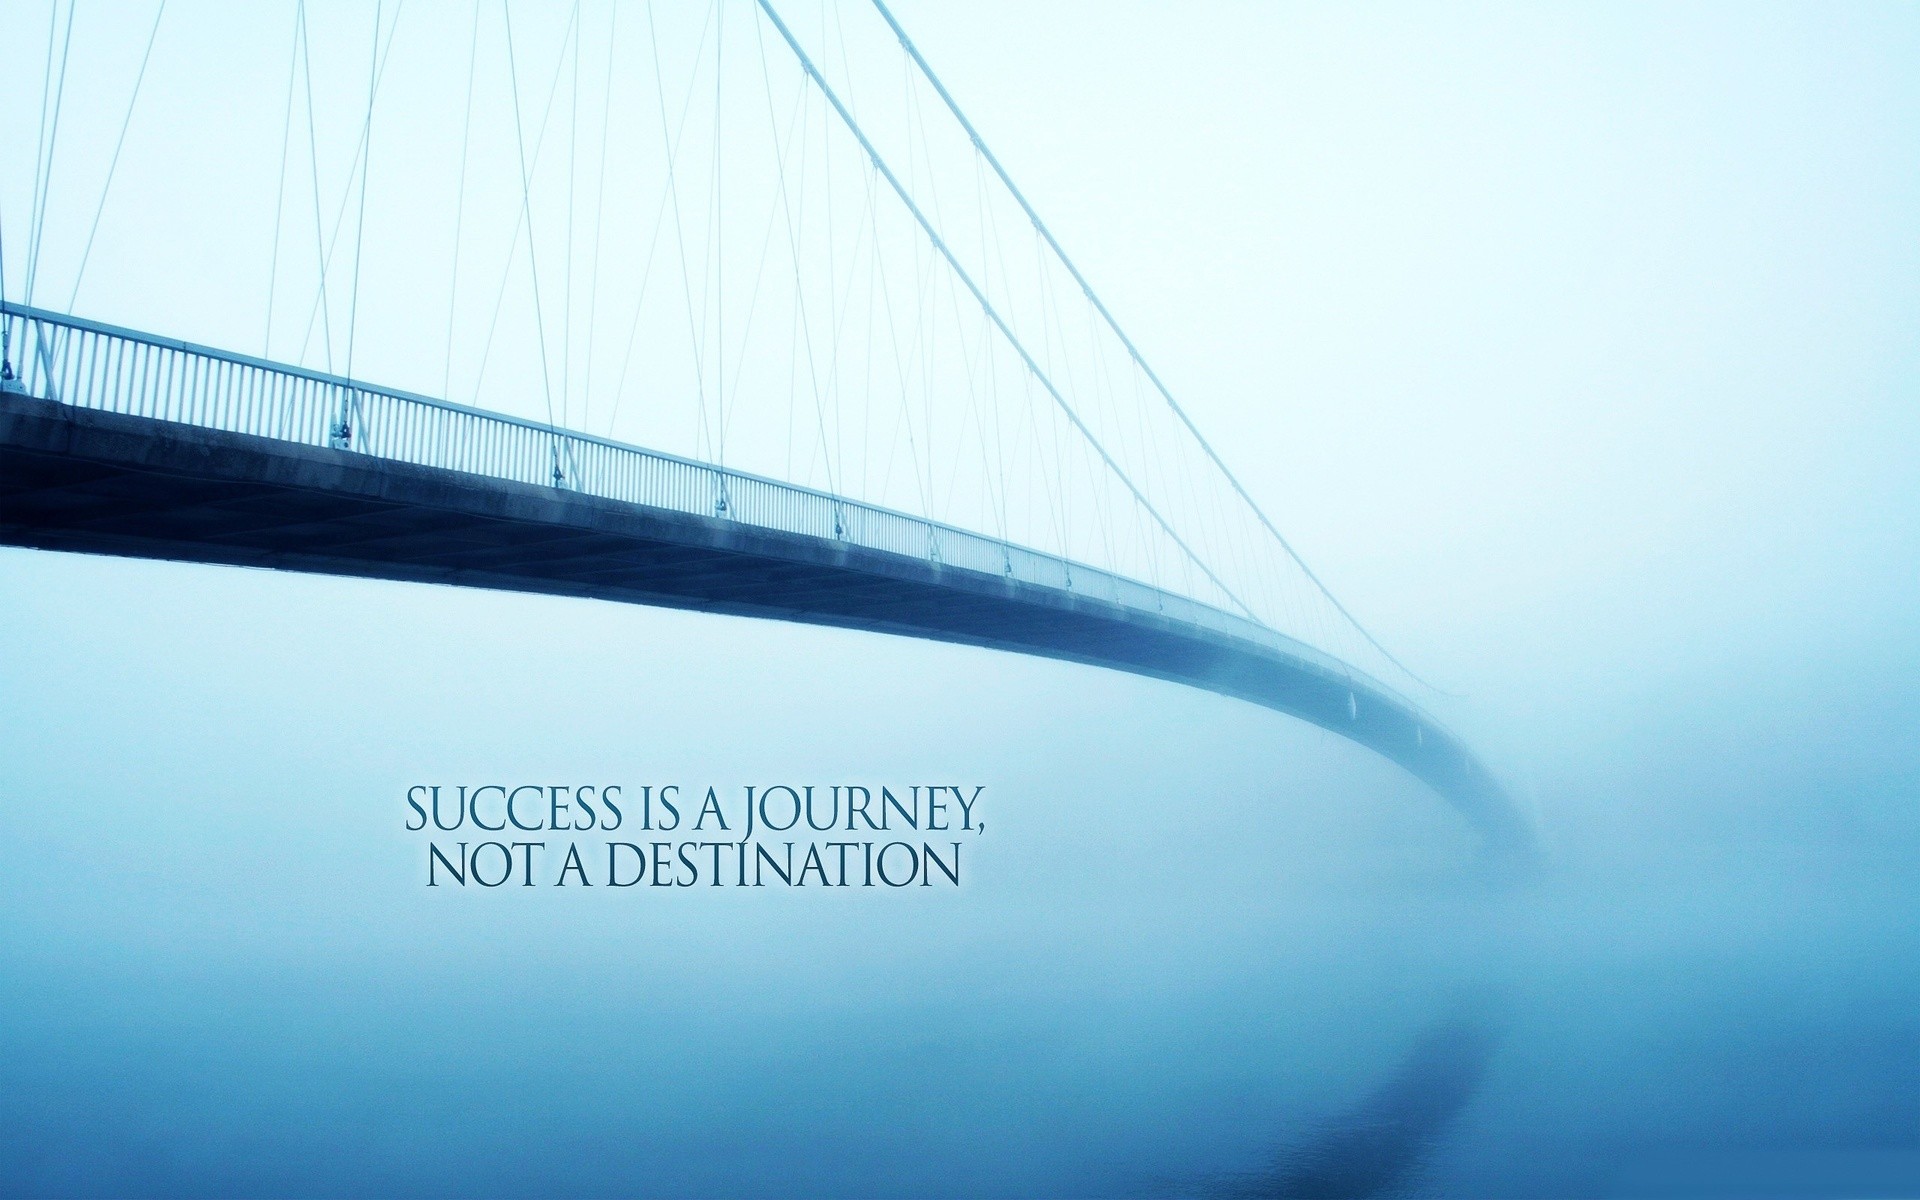 Journey Inspirational Quotes The Desktop Backgrounds Quotesgram